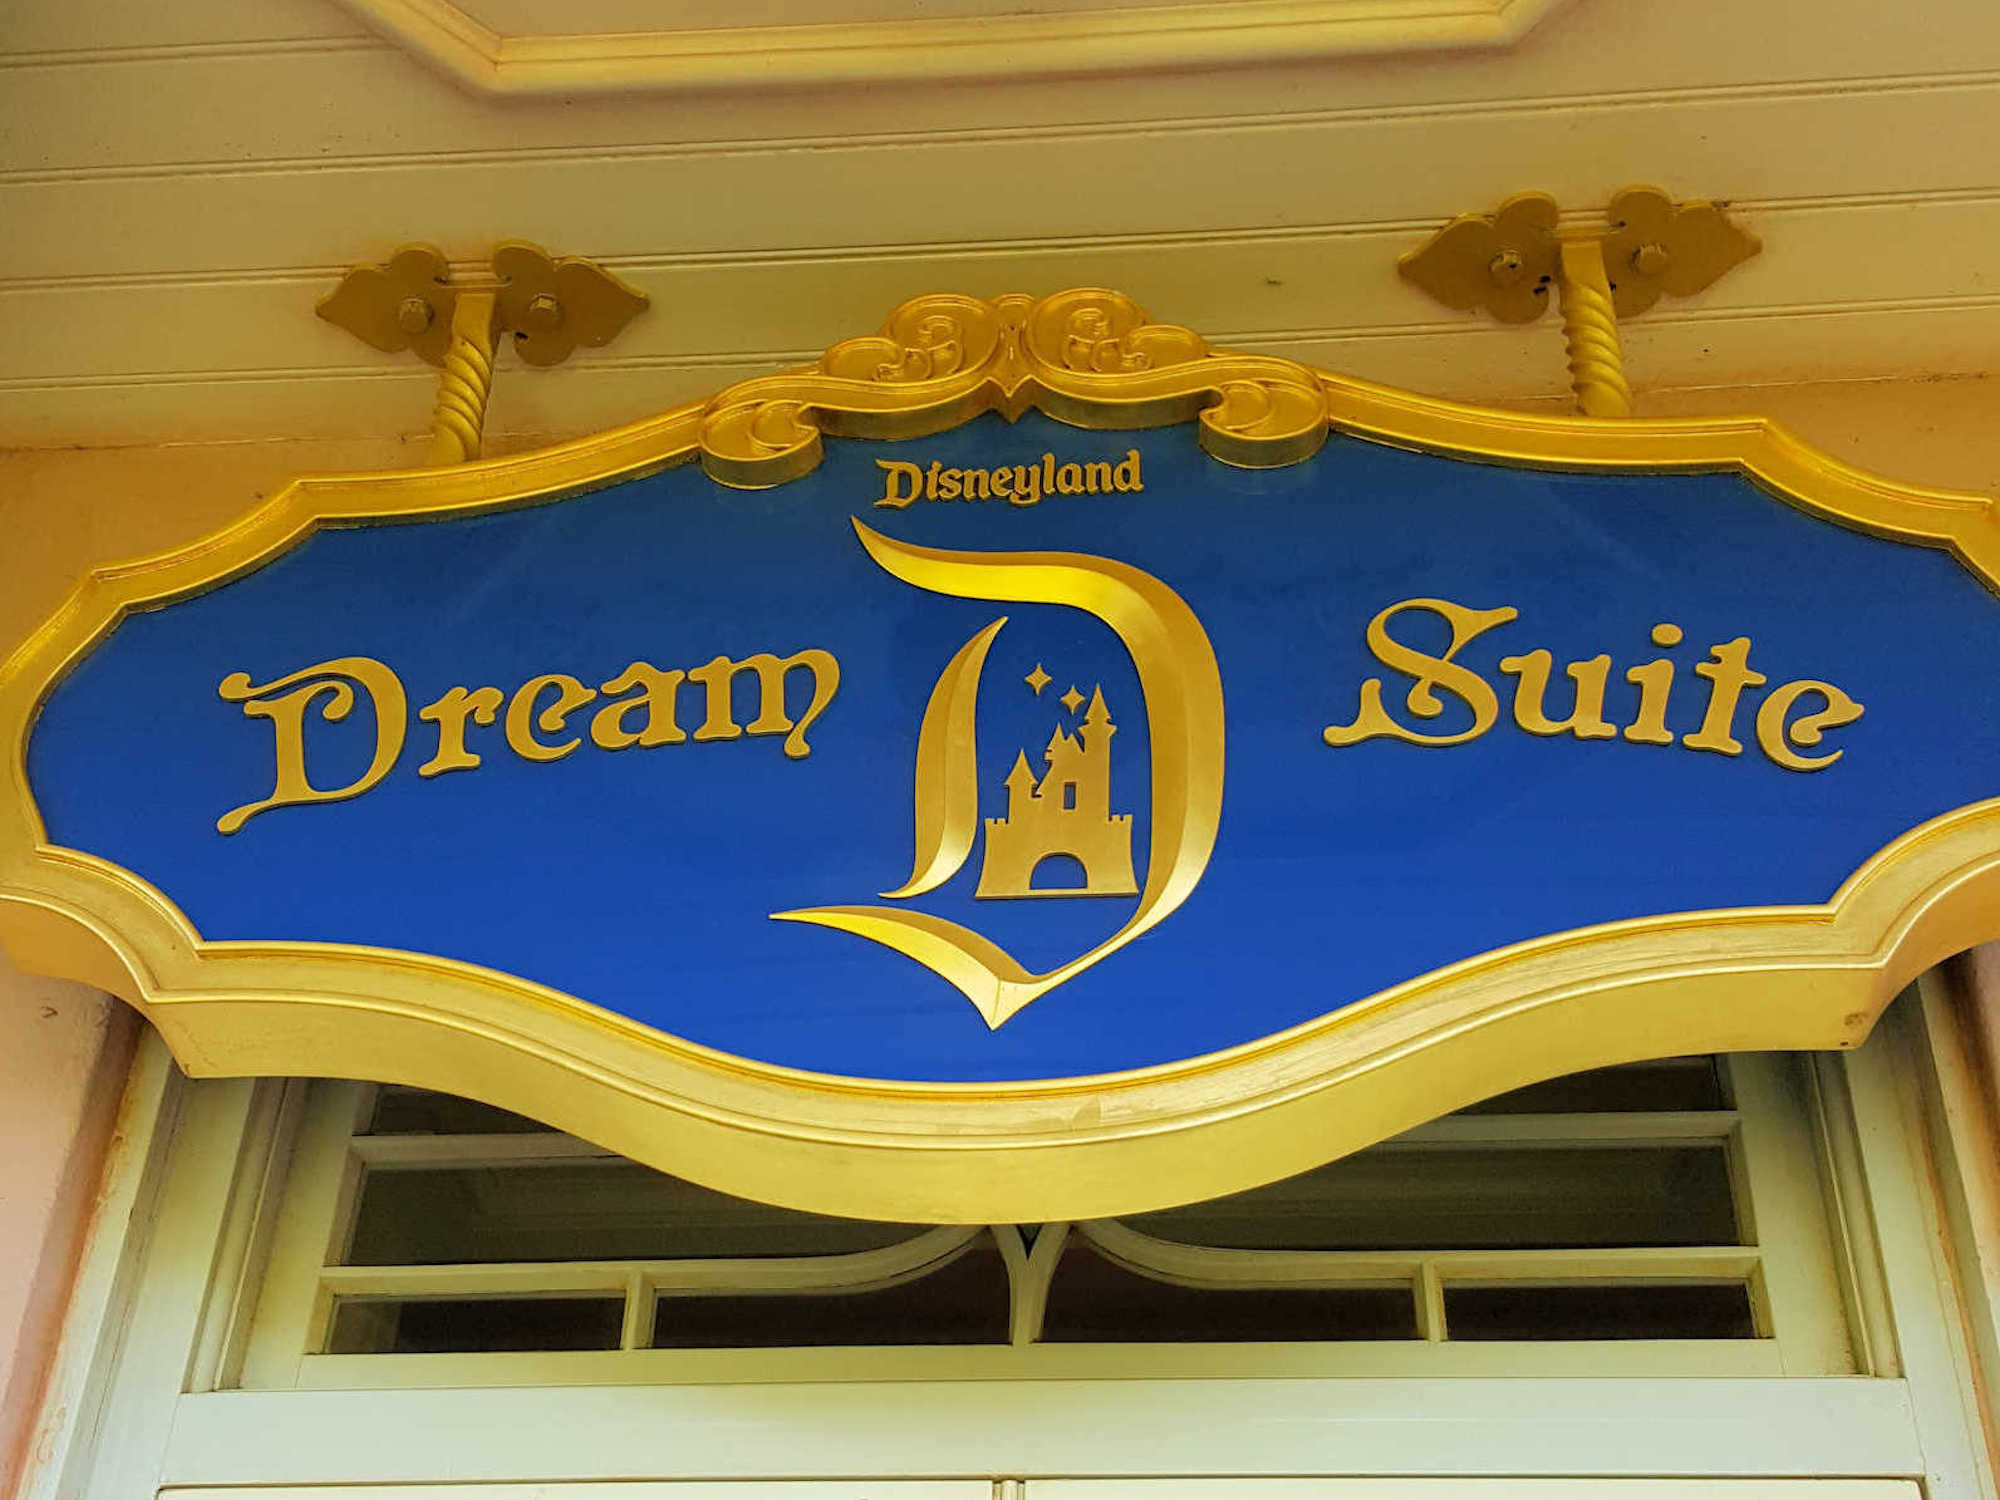 Disneyland New Orleans Square Dream Suite wider view of sign